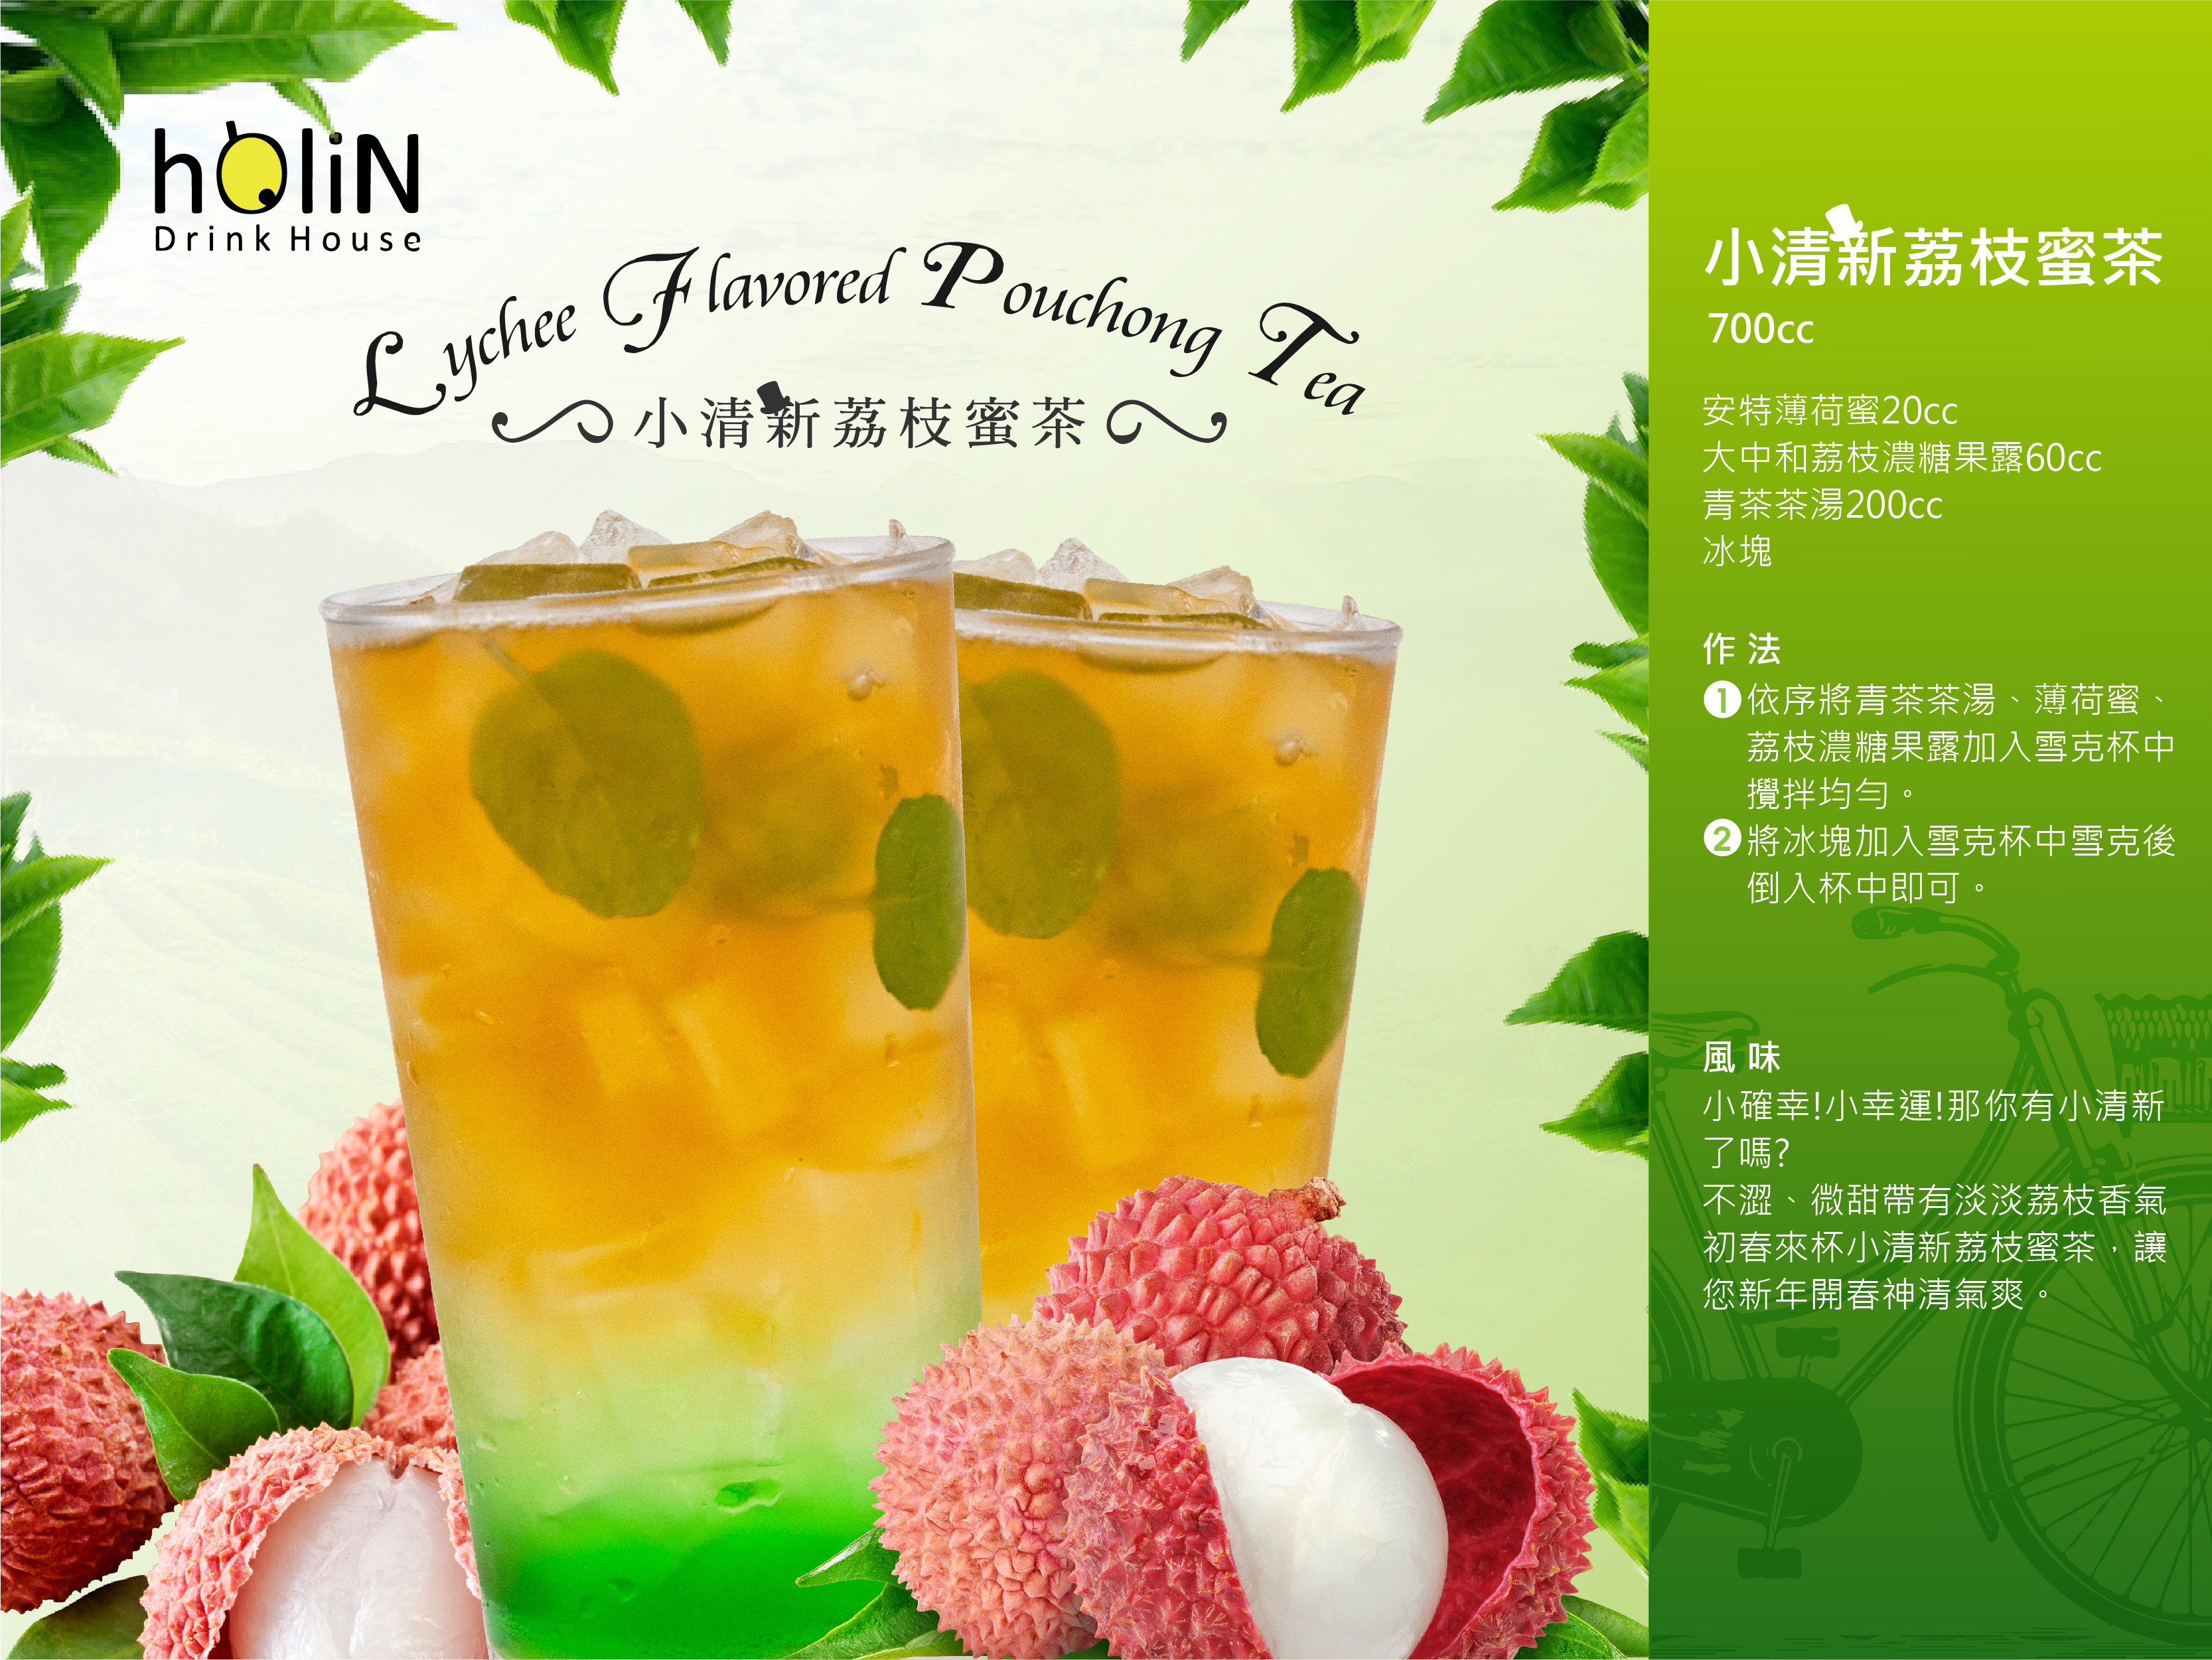  Lychee Flavored Pouchong Tea